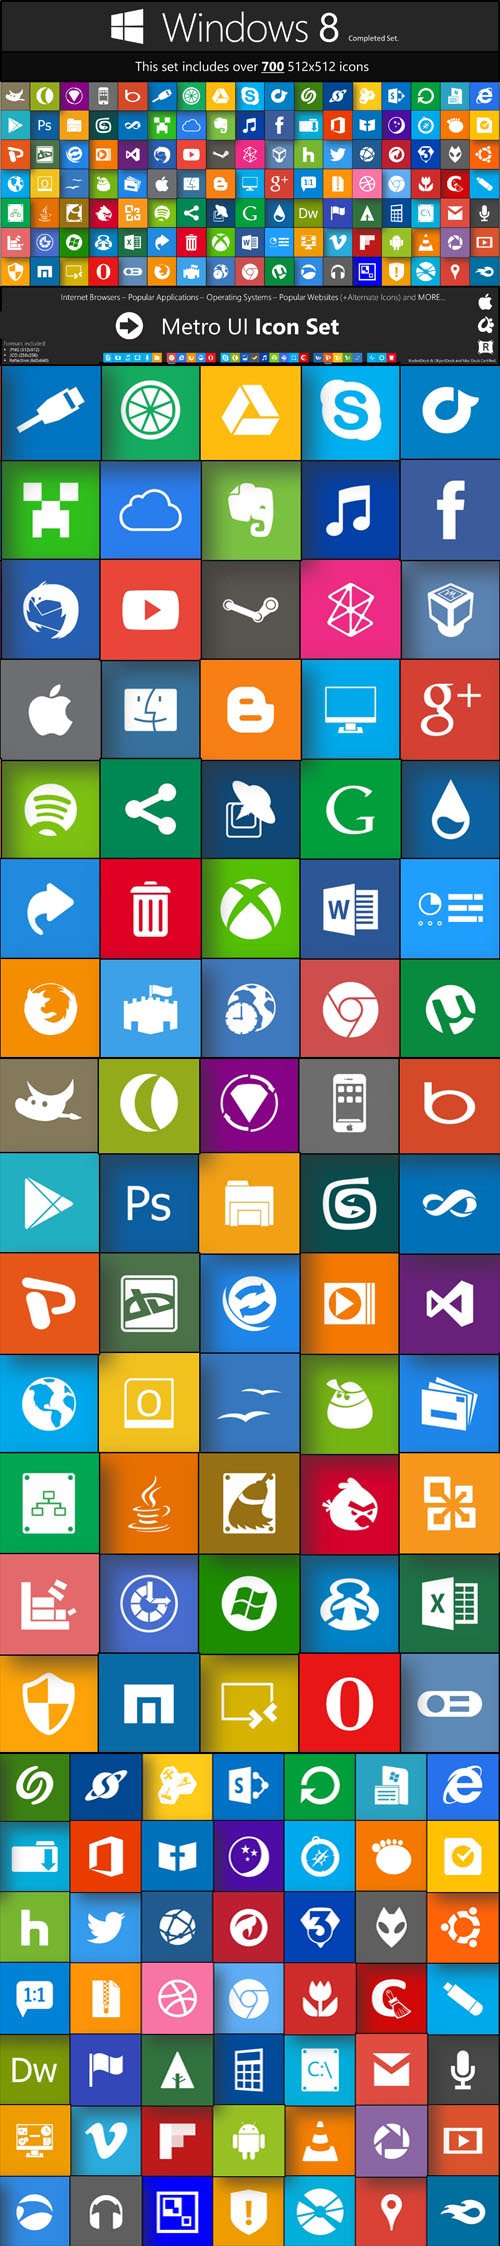 Win 8 Icons - Metro UI Icon Completed Set - 700+ Icons